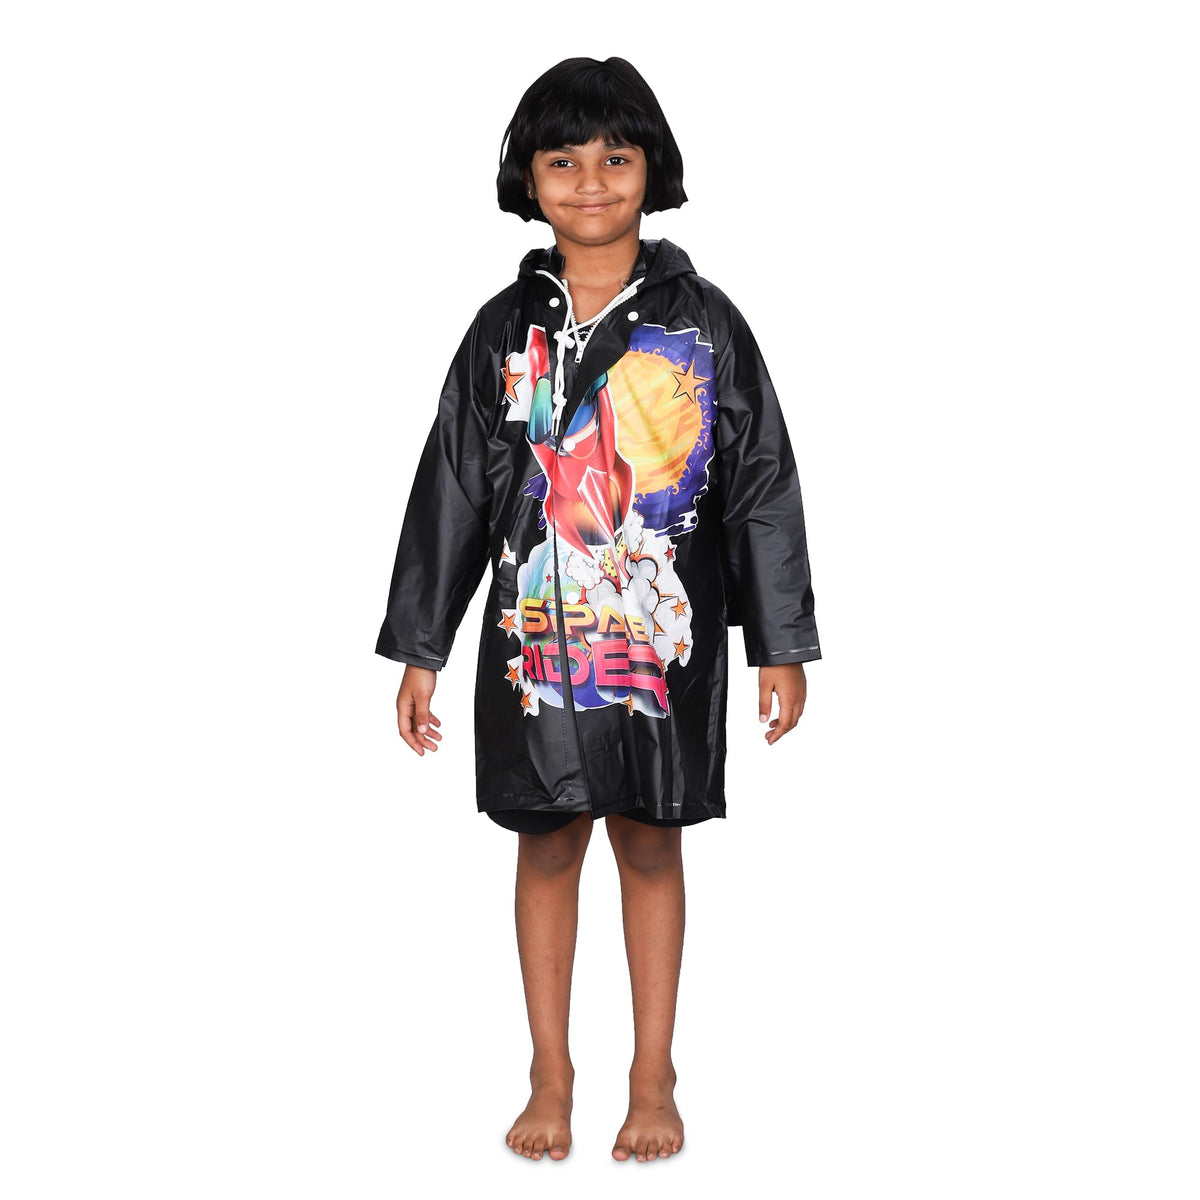 THE CLOWNFISH Toon Caper Series Kids Waterproof PVC Longcoat with Adjustable Hood & Extra Space for Backpack/Schoolbag Holding. Printed Plastic Pouch. Kid Age-4-5 years (Midnight Blue)